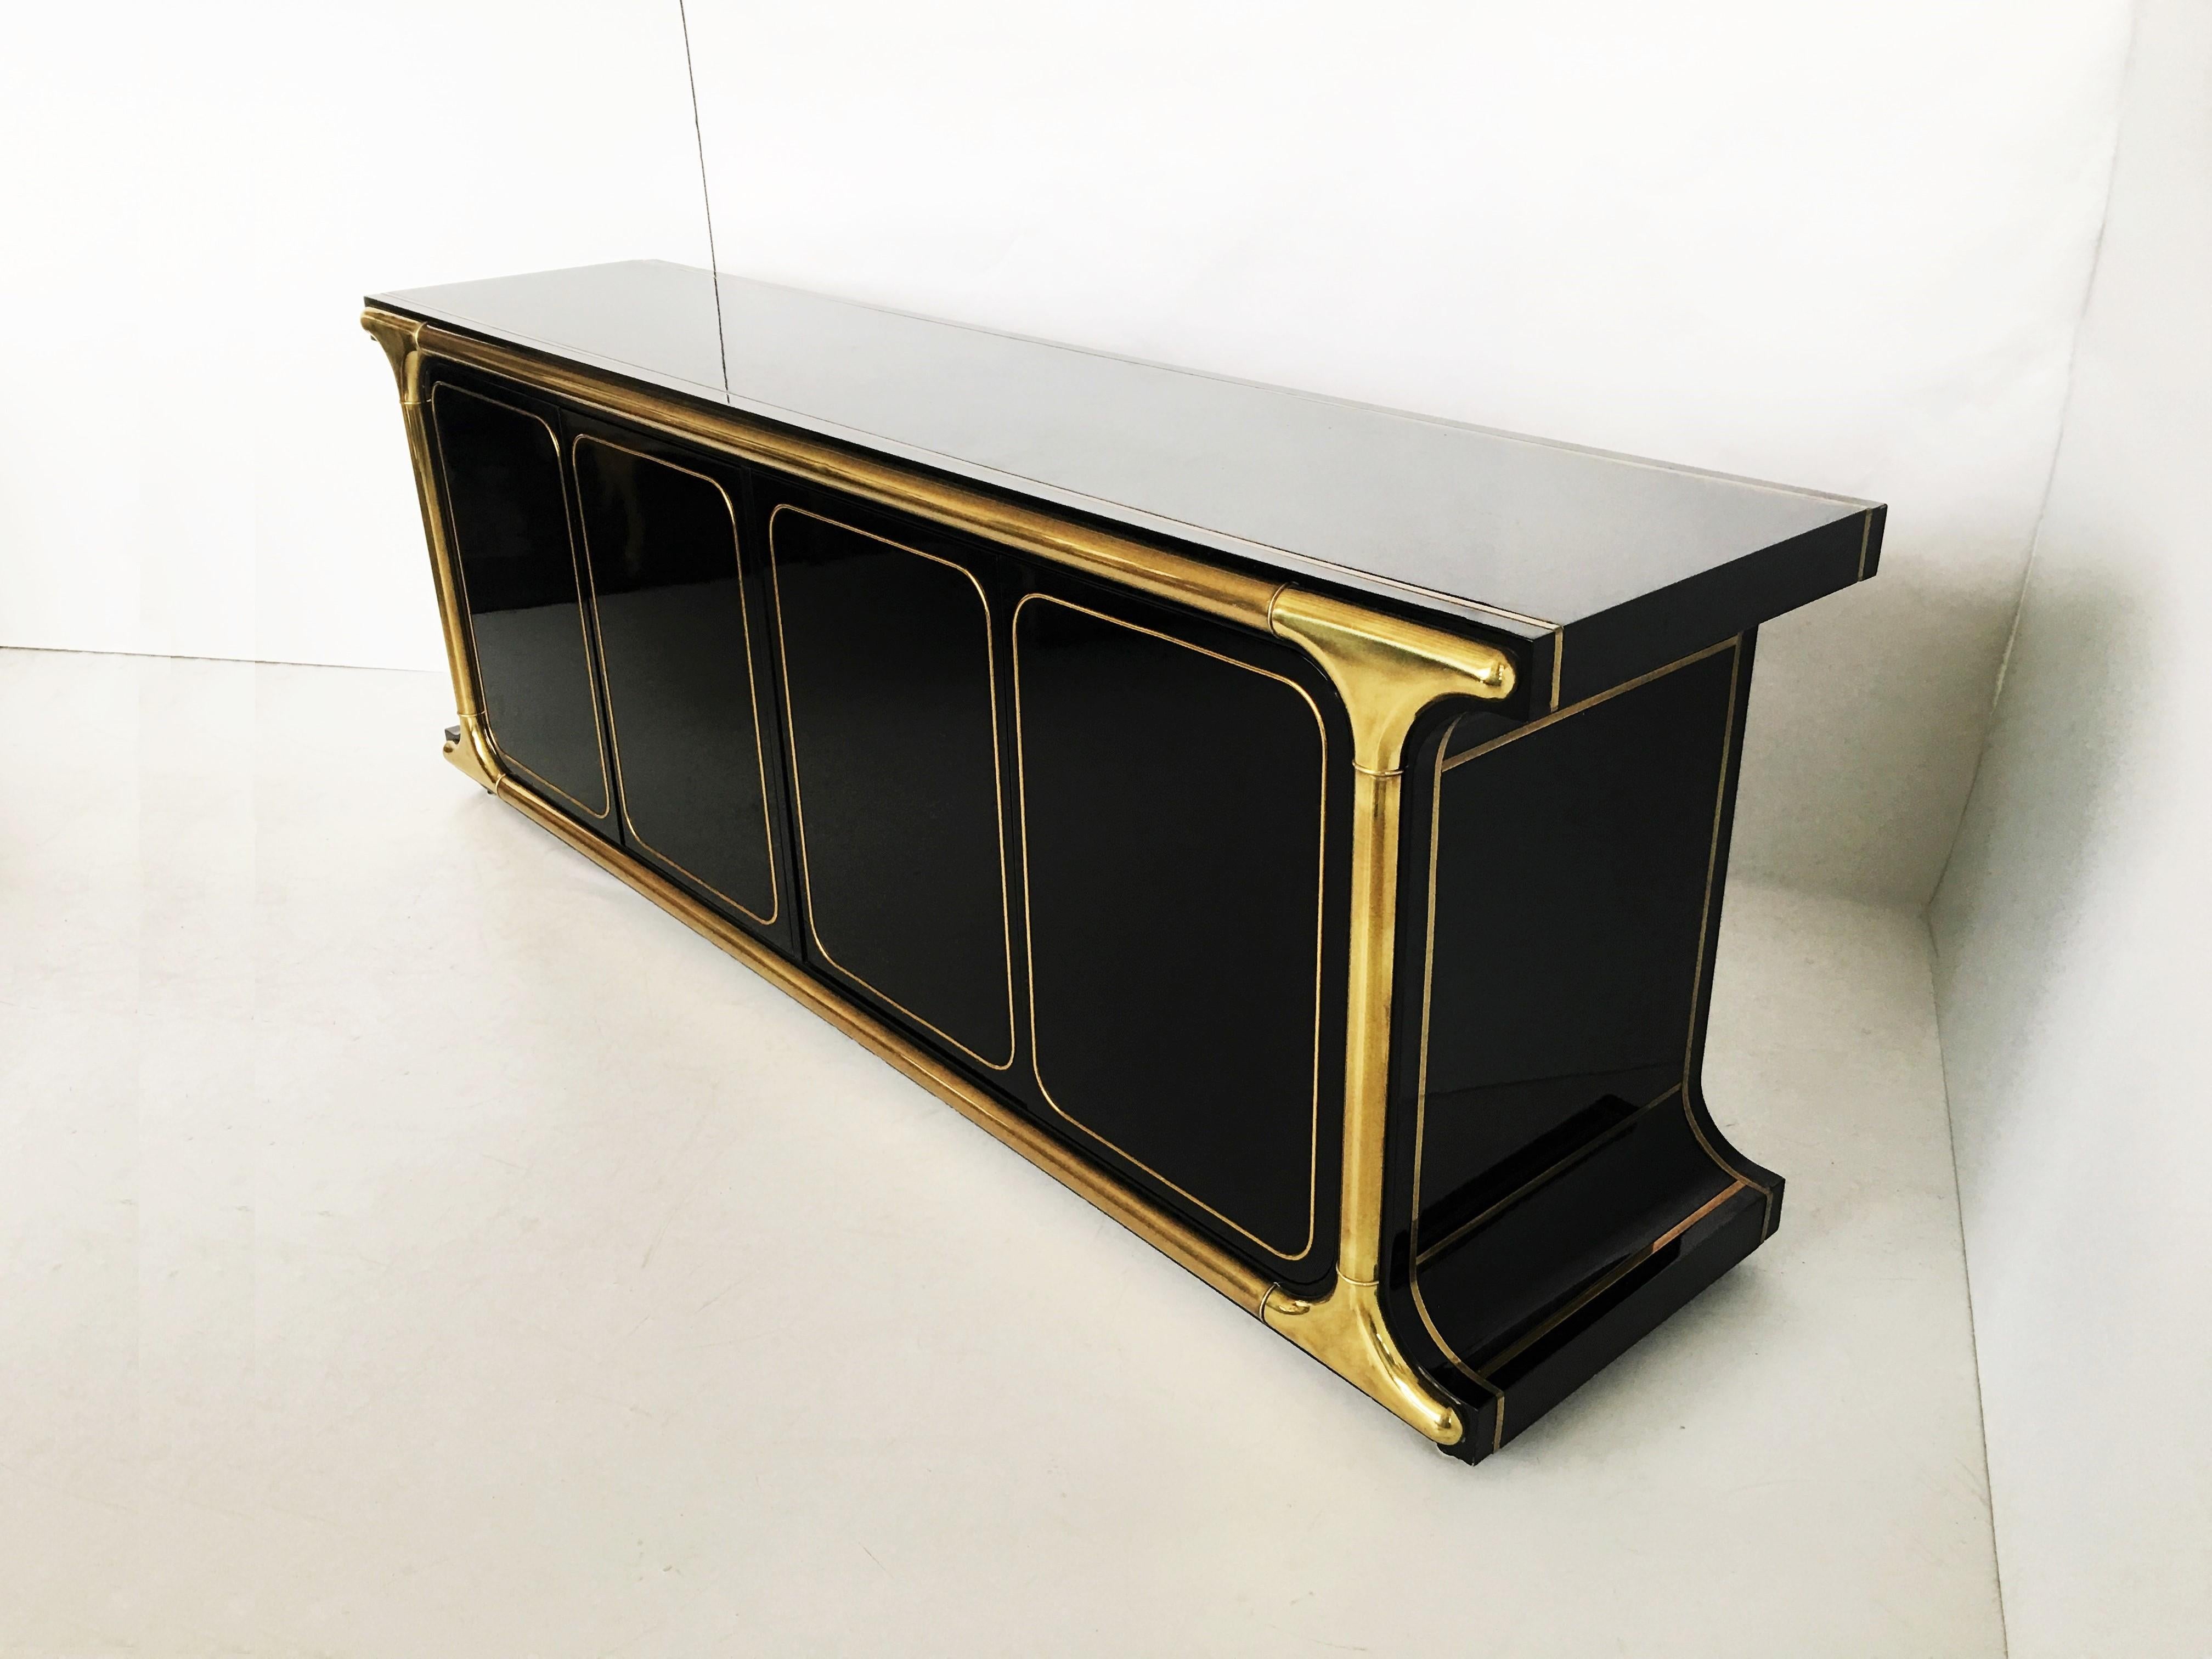 Lacquered Monumental Black Lacquer and Brass Credenza by Mastercraft